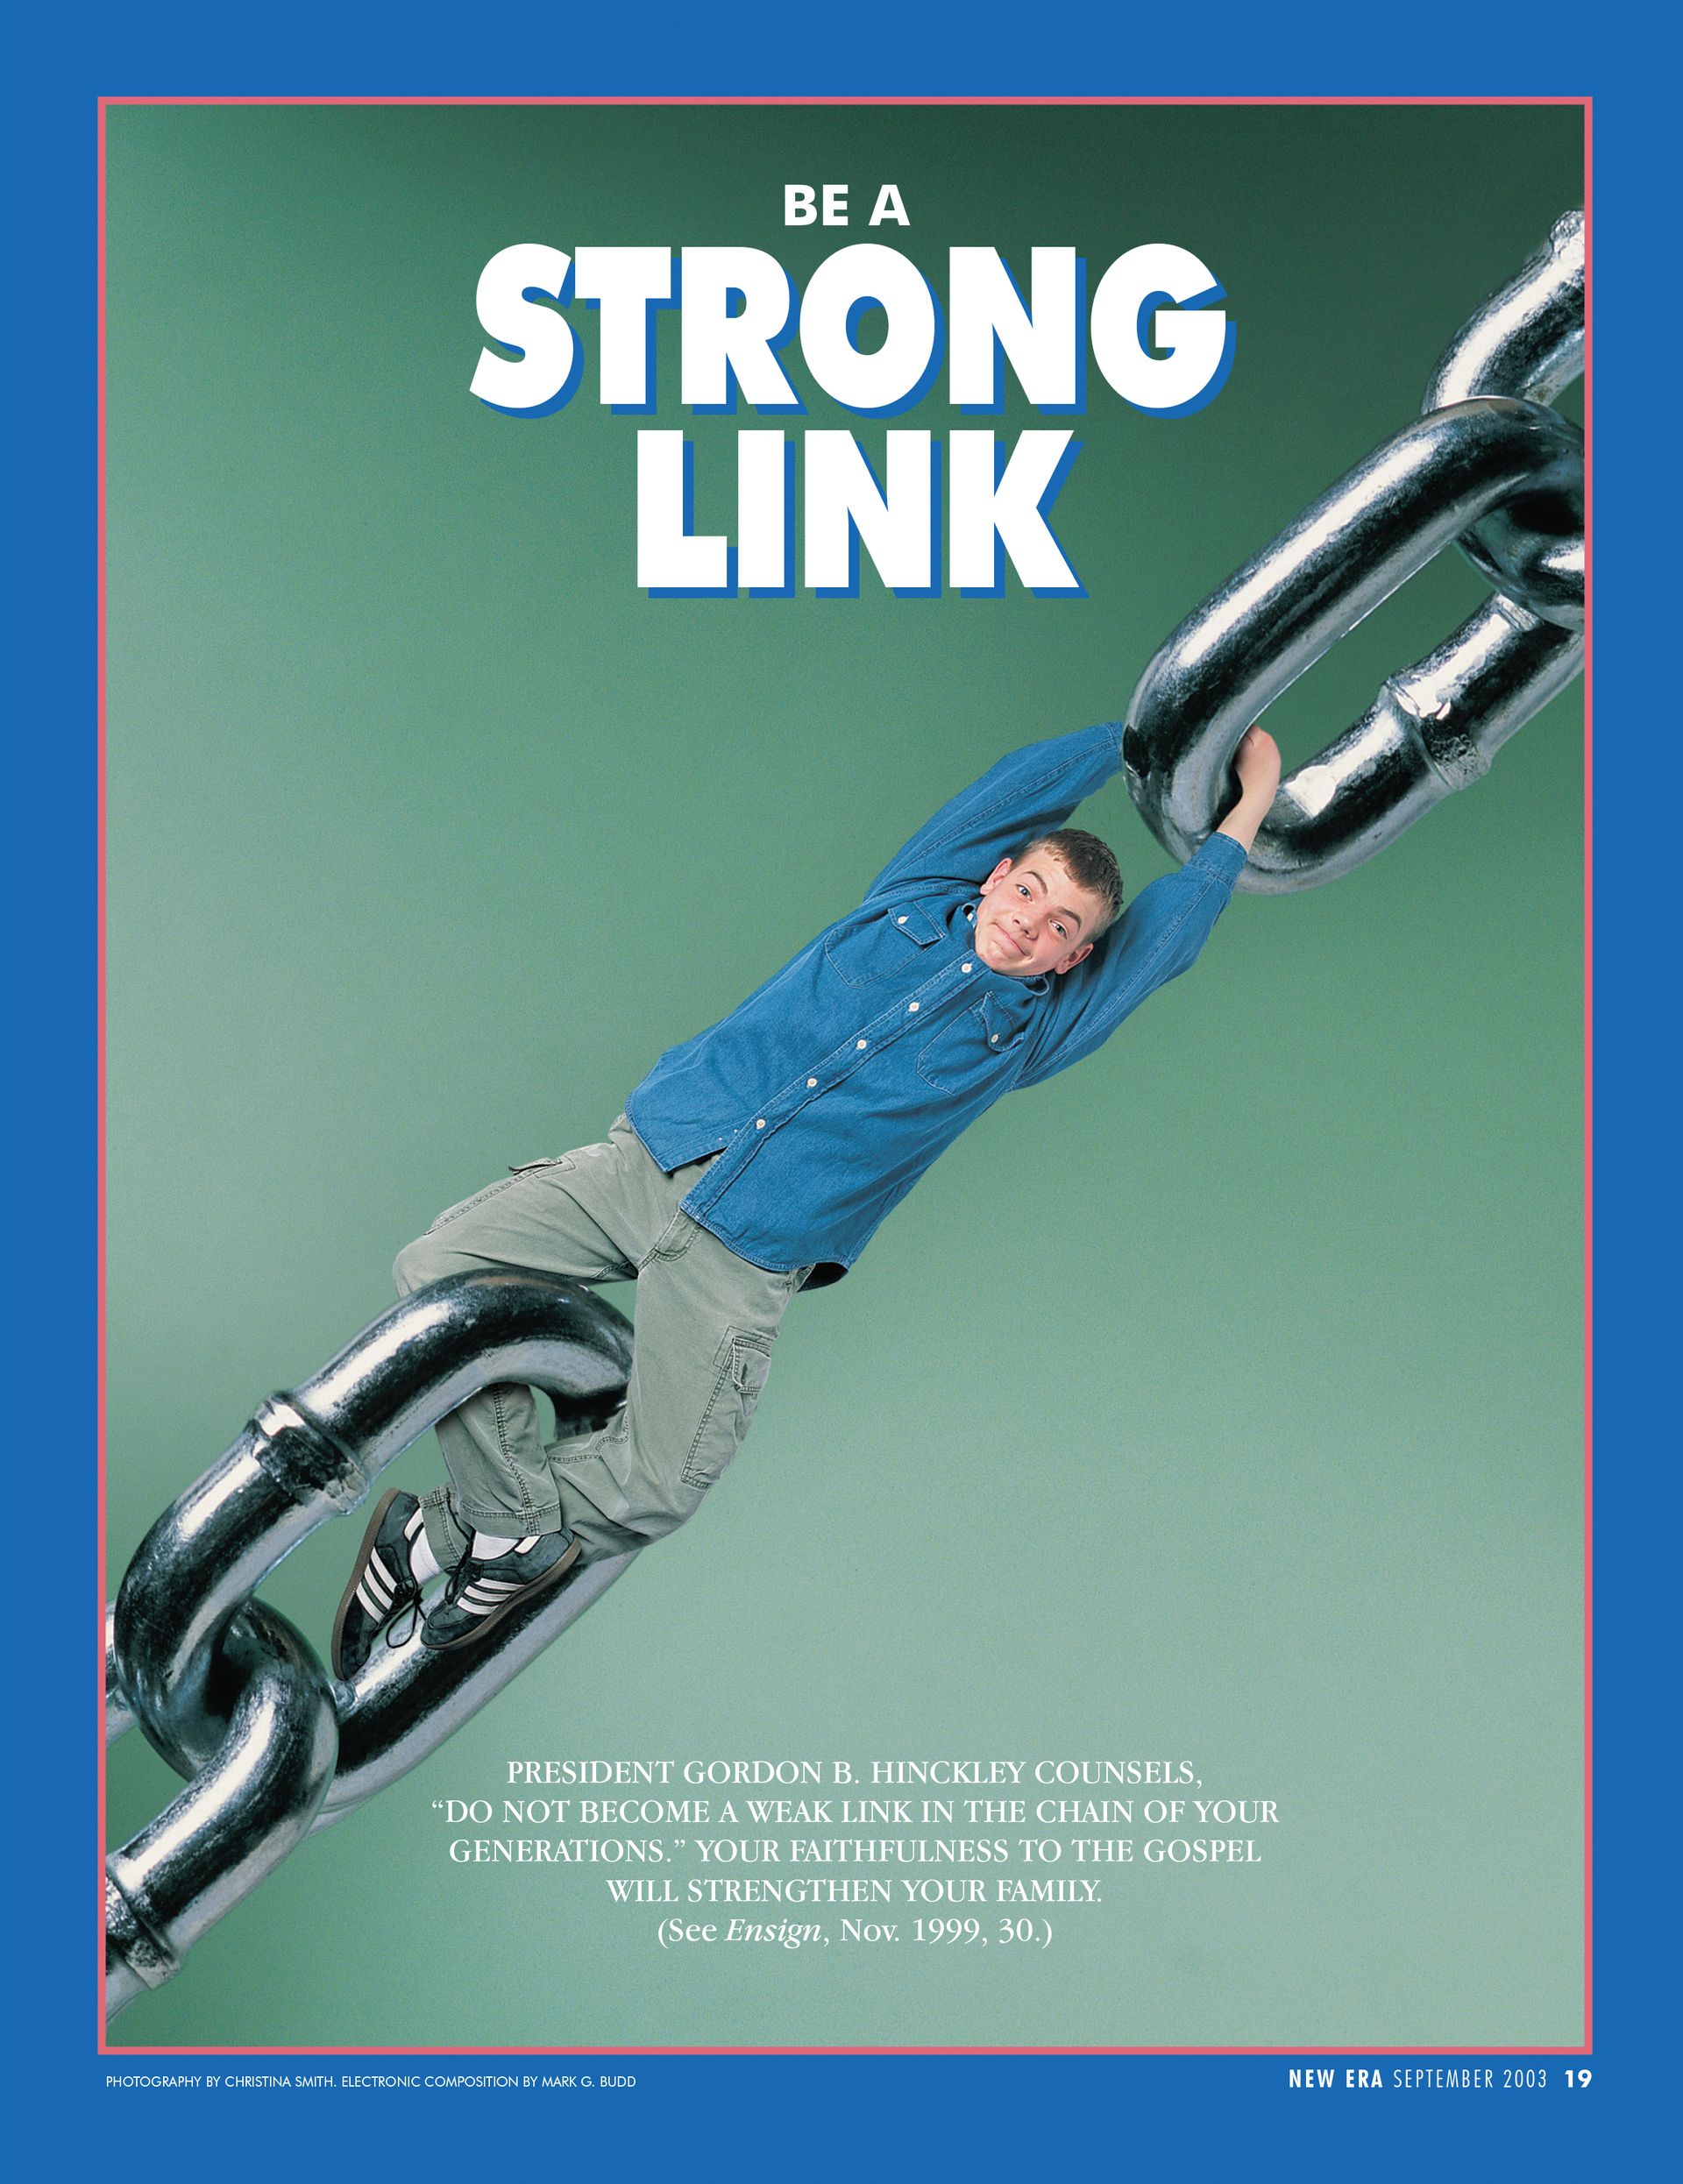 Be a Strong Link. President Gordon B. Hinckley counsels, “Do not become a weak link in the chain of your generations.” Your faithfulness to the gospel will strengthen your family. (See Ensign, Nov. 1999, 30.) Sept. 2003 © undefined ipCode 1.